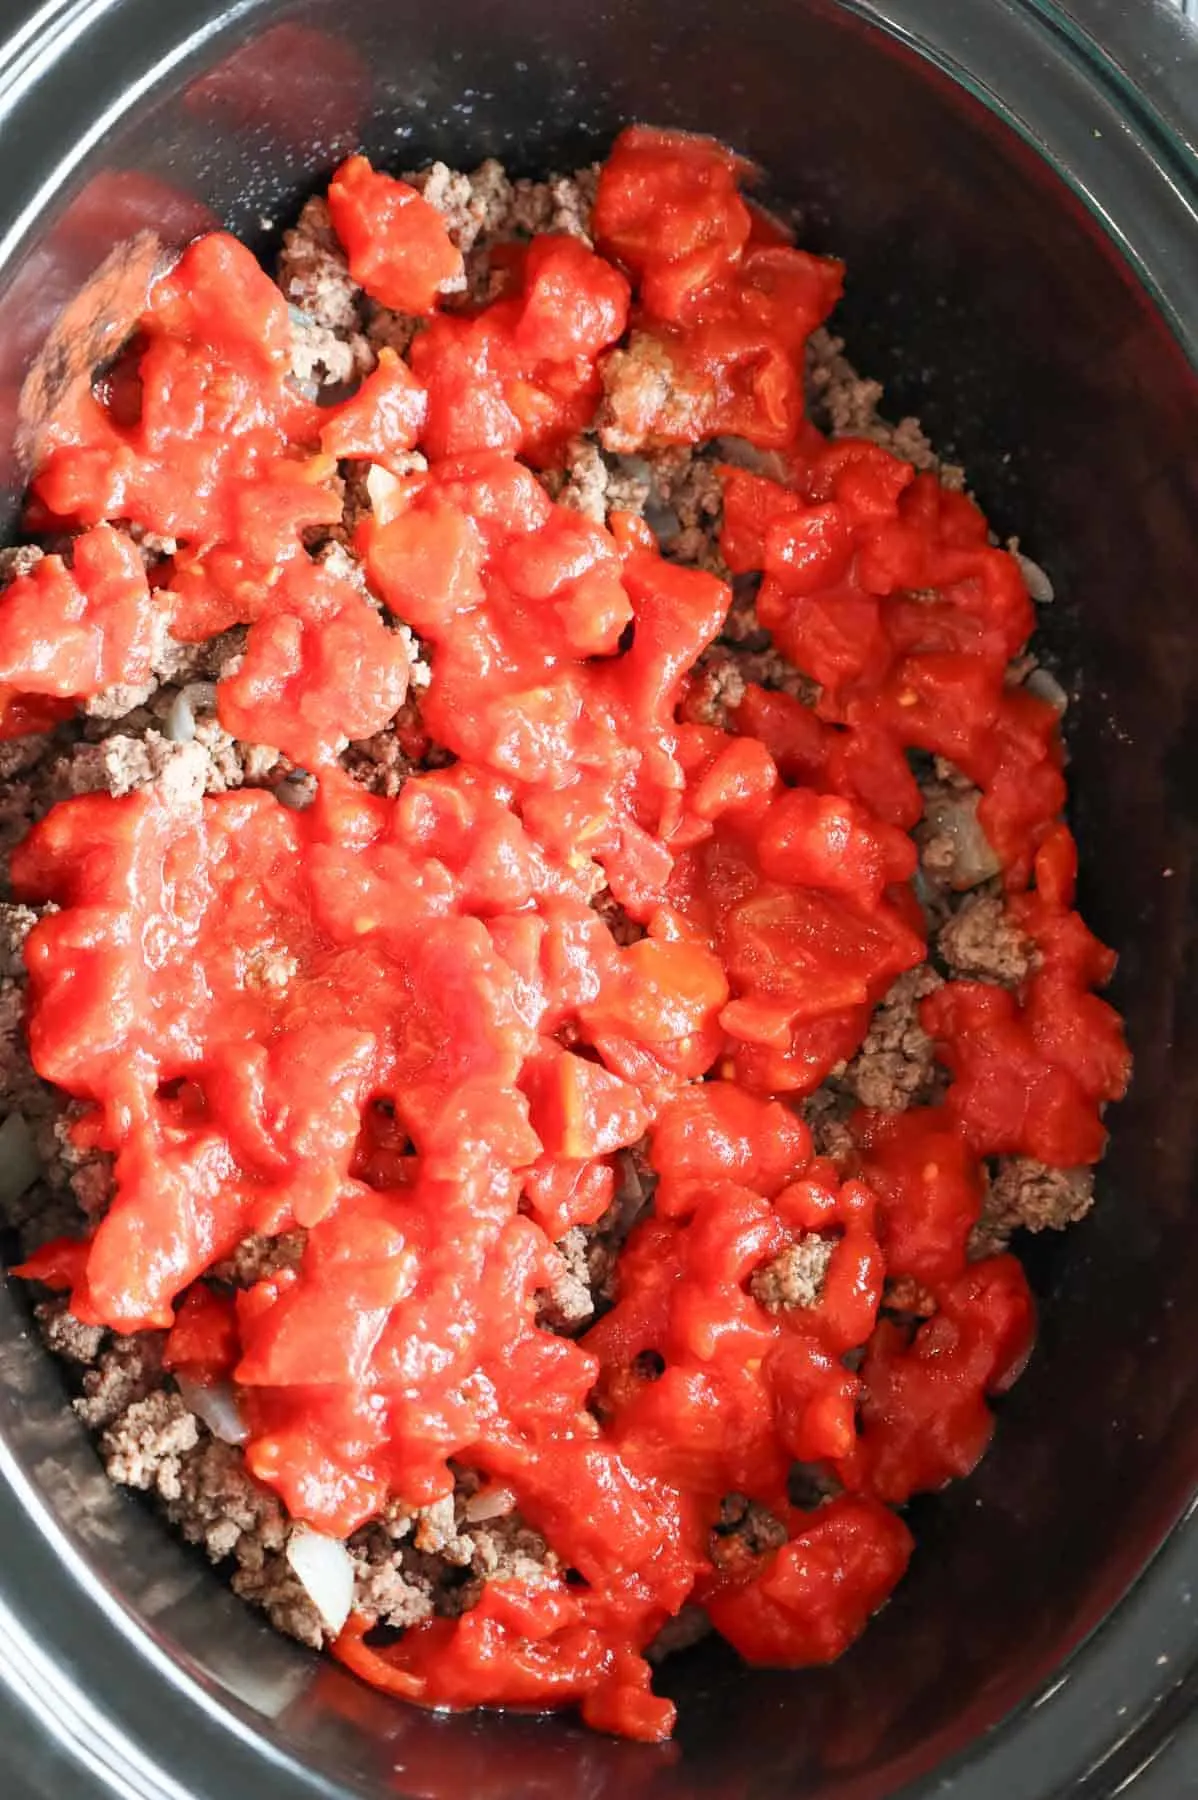 diced tomatoes on top of cooked ground beef in a slow cooker